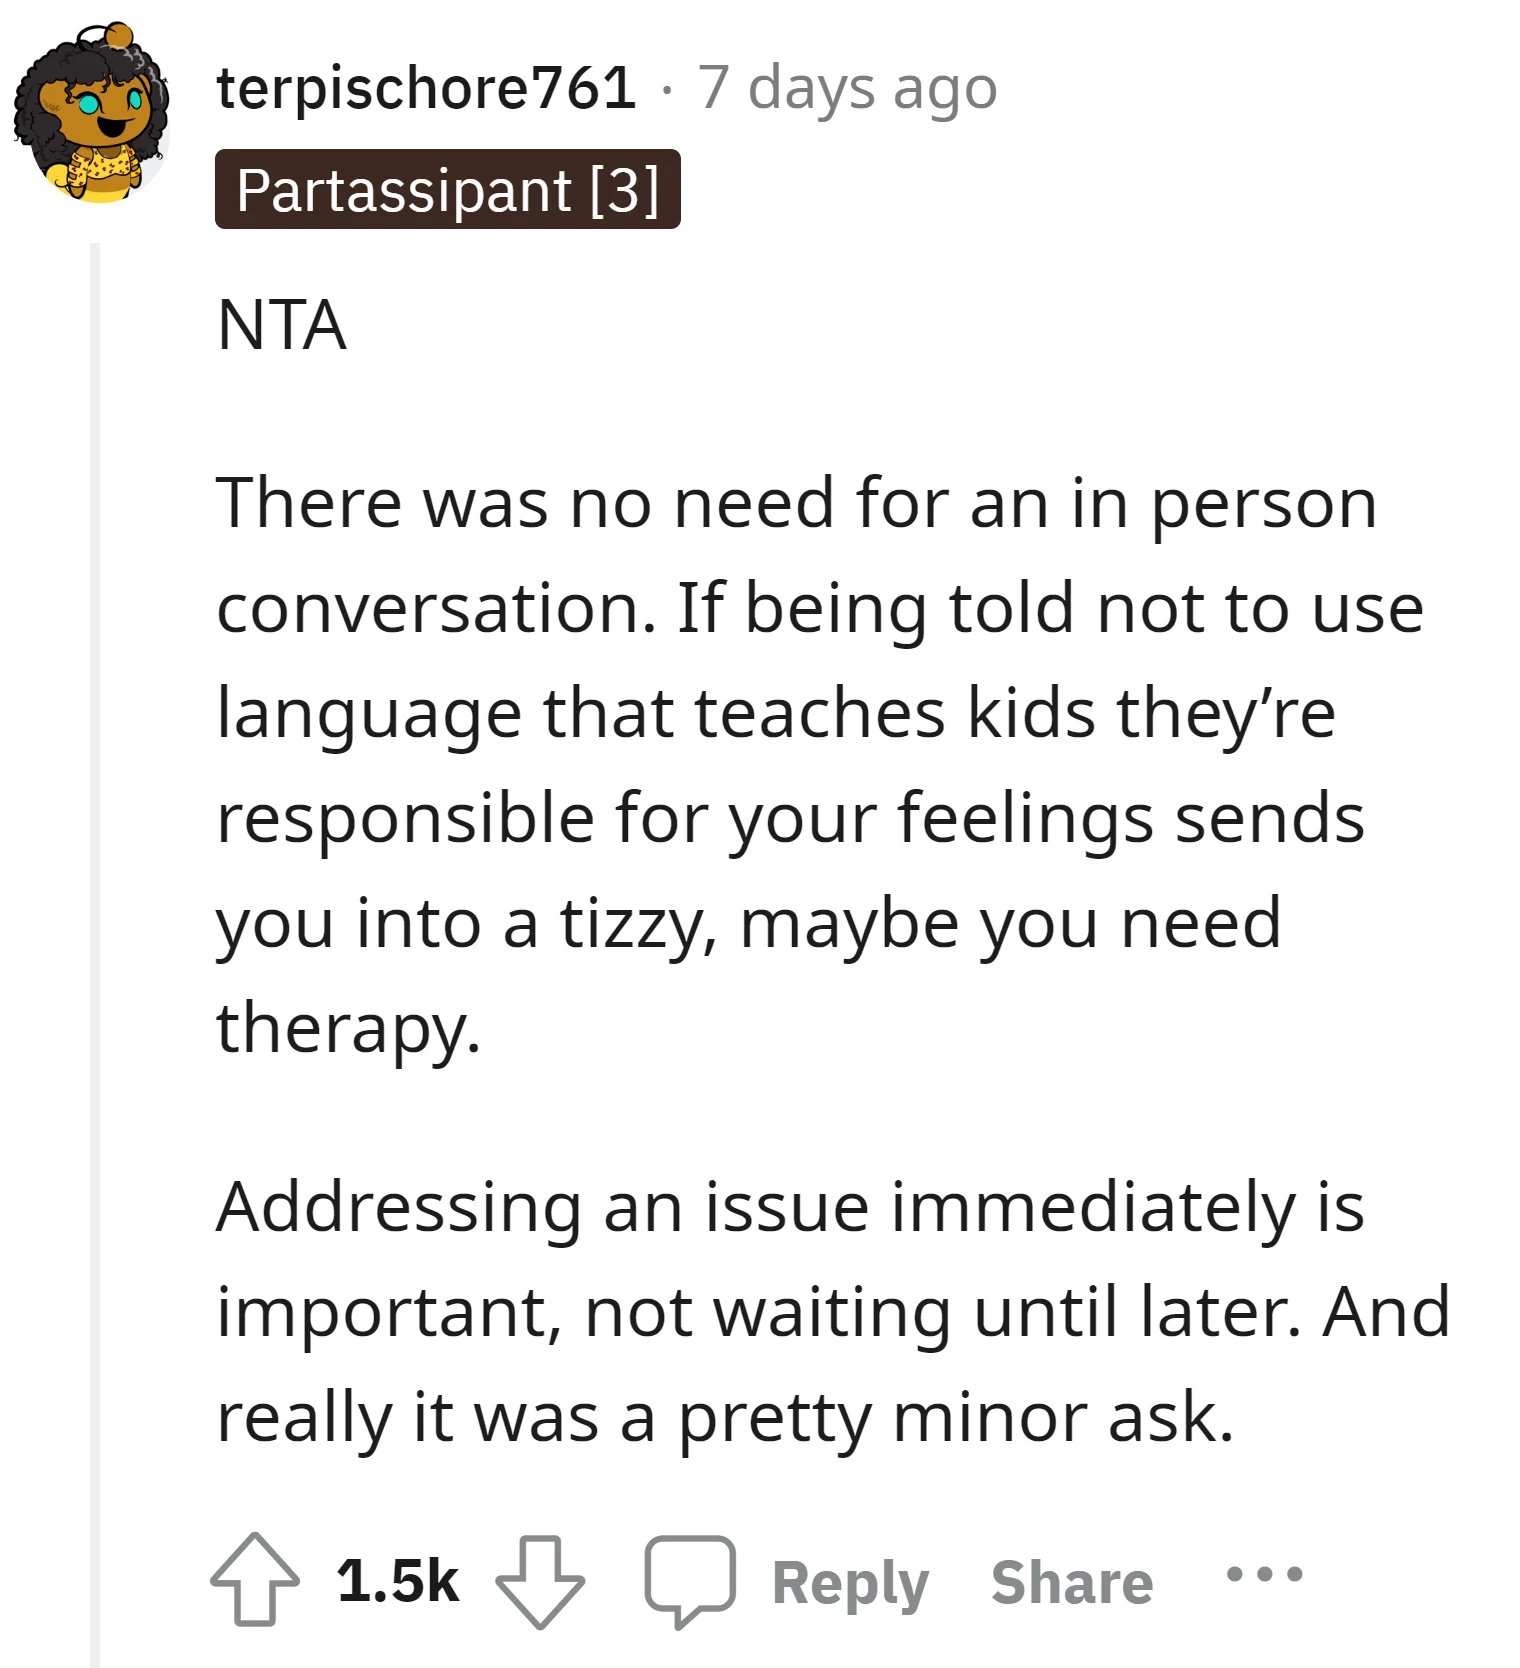 This commenter supports the OP, stating that an in-person conversation was unnecessary